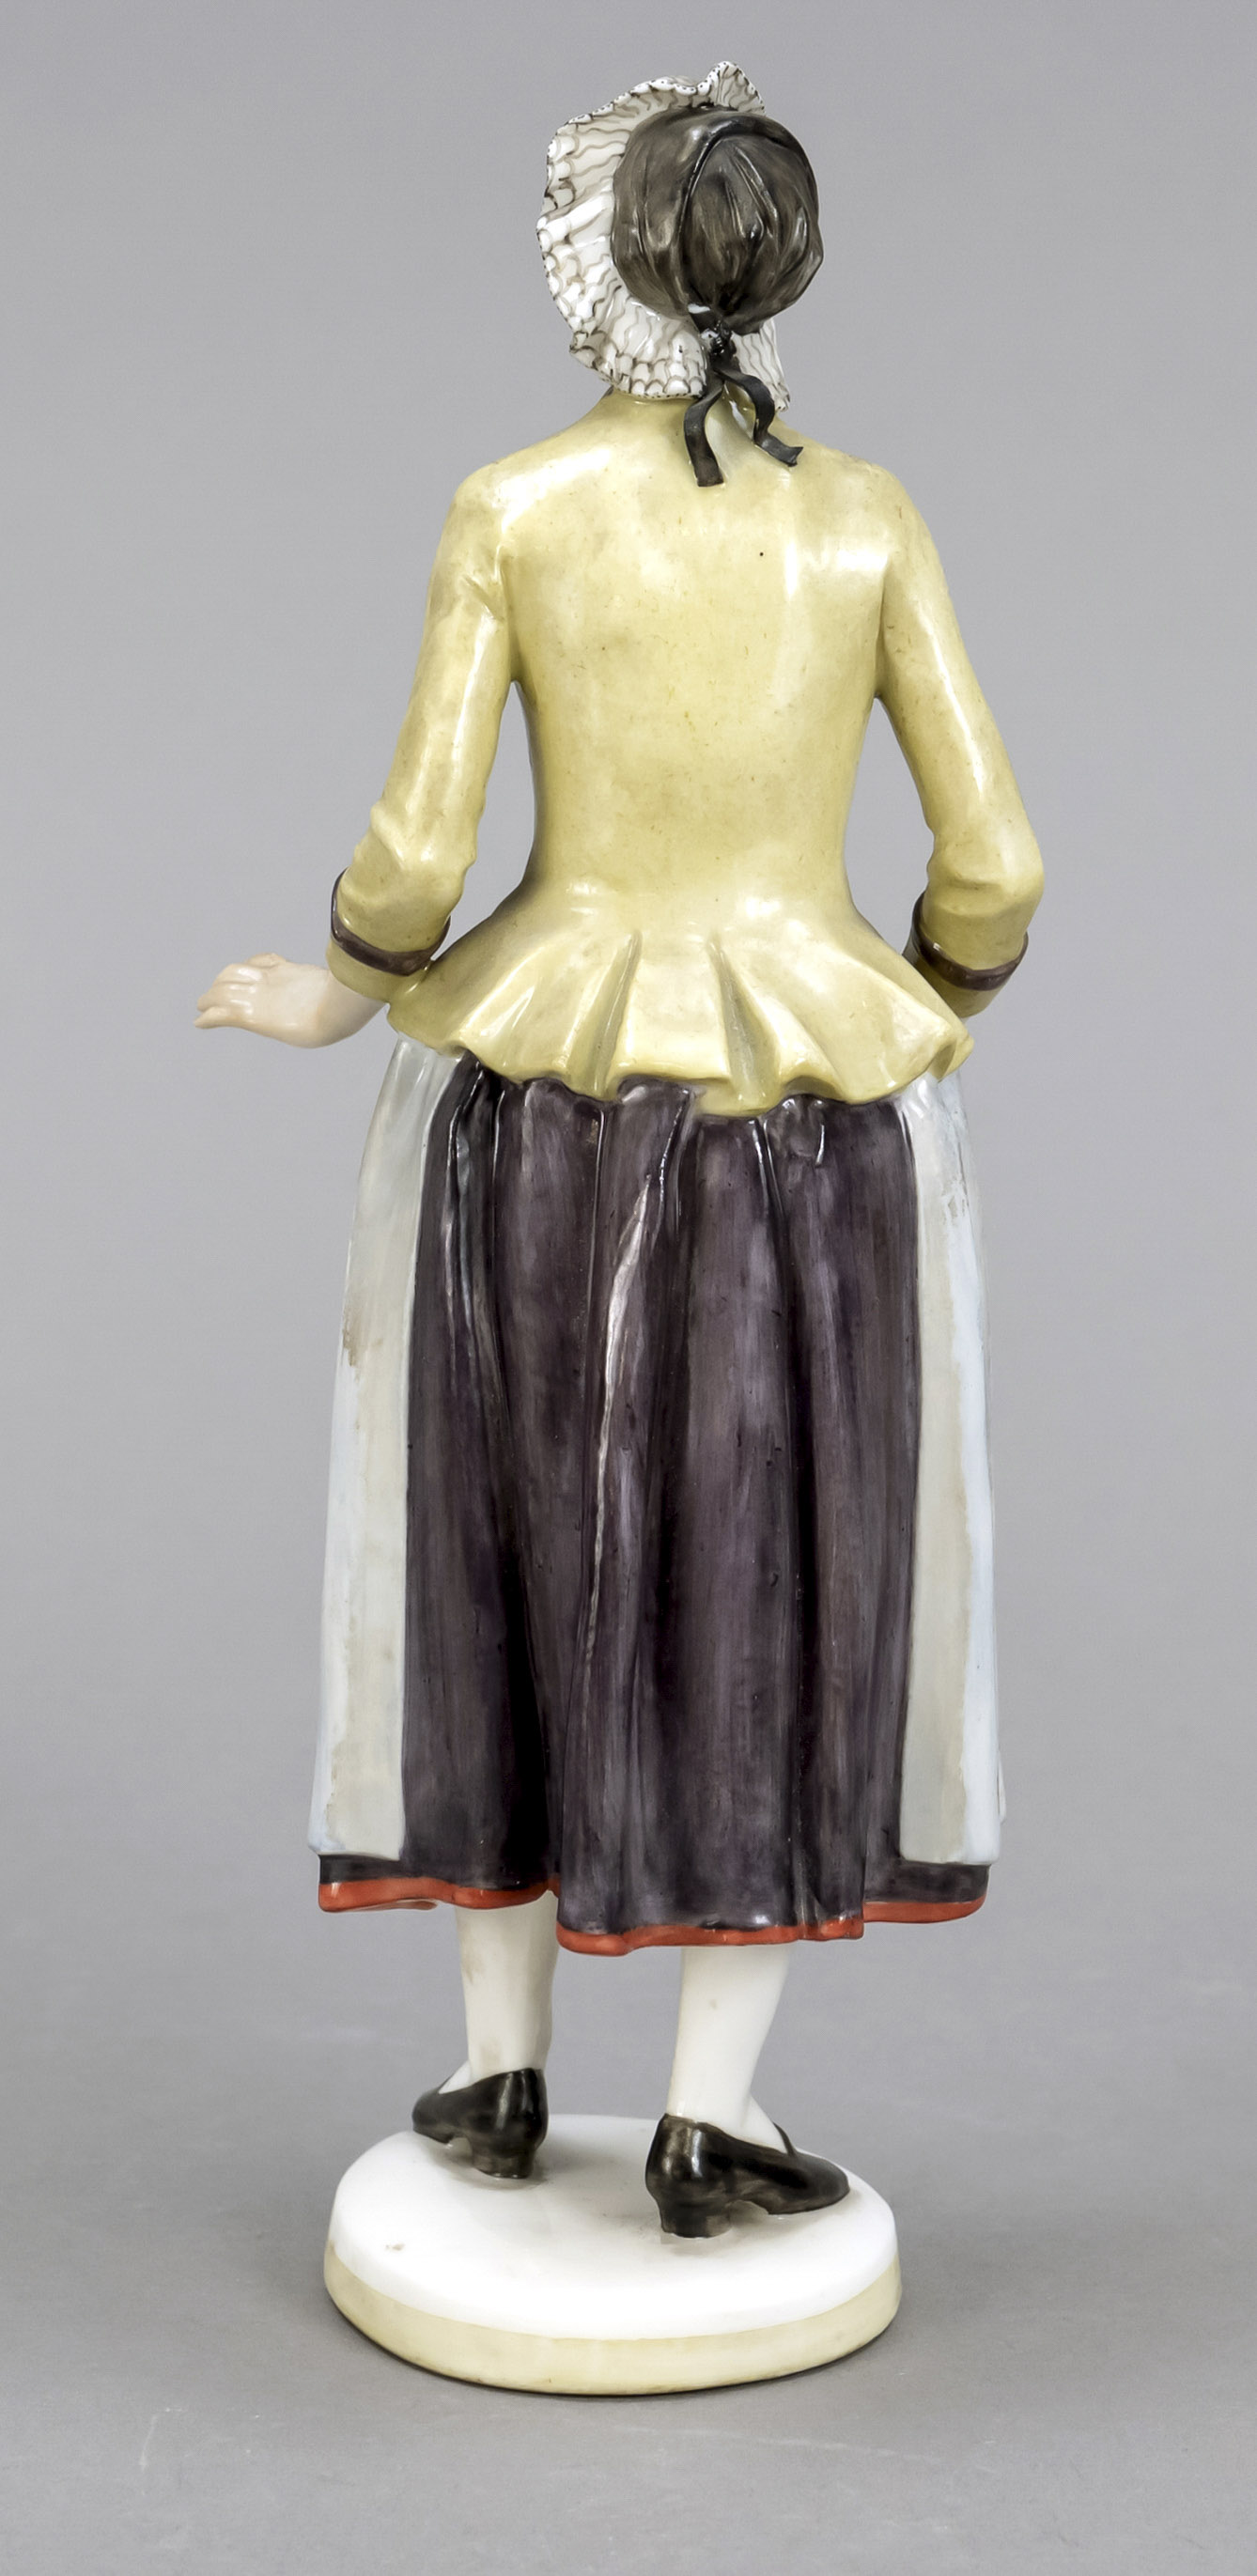 Traditional costume figure, Nymphenburg, mark 1925-75, model no. 879, woman in traditional costume - Image 2 of 2